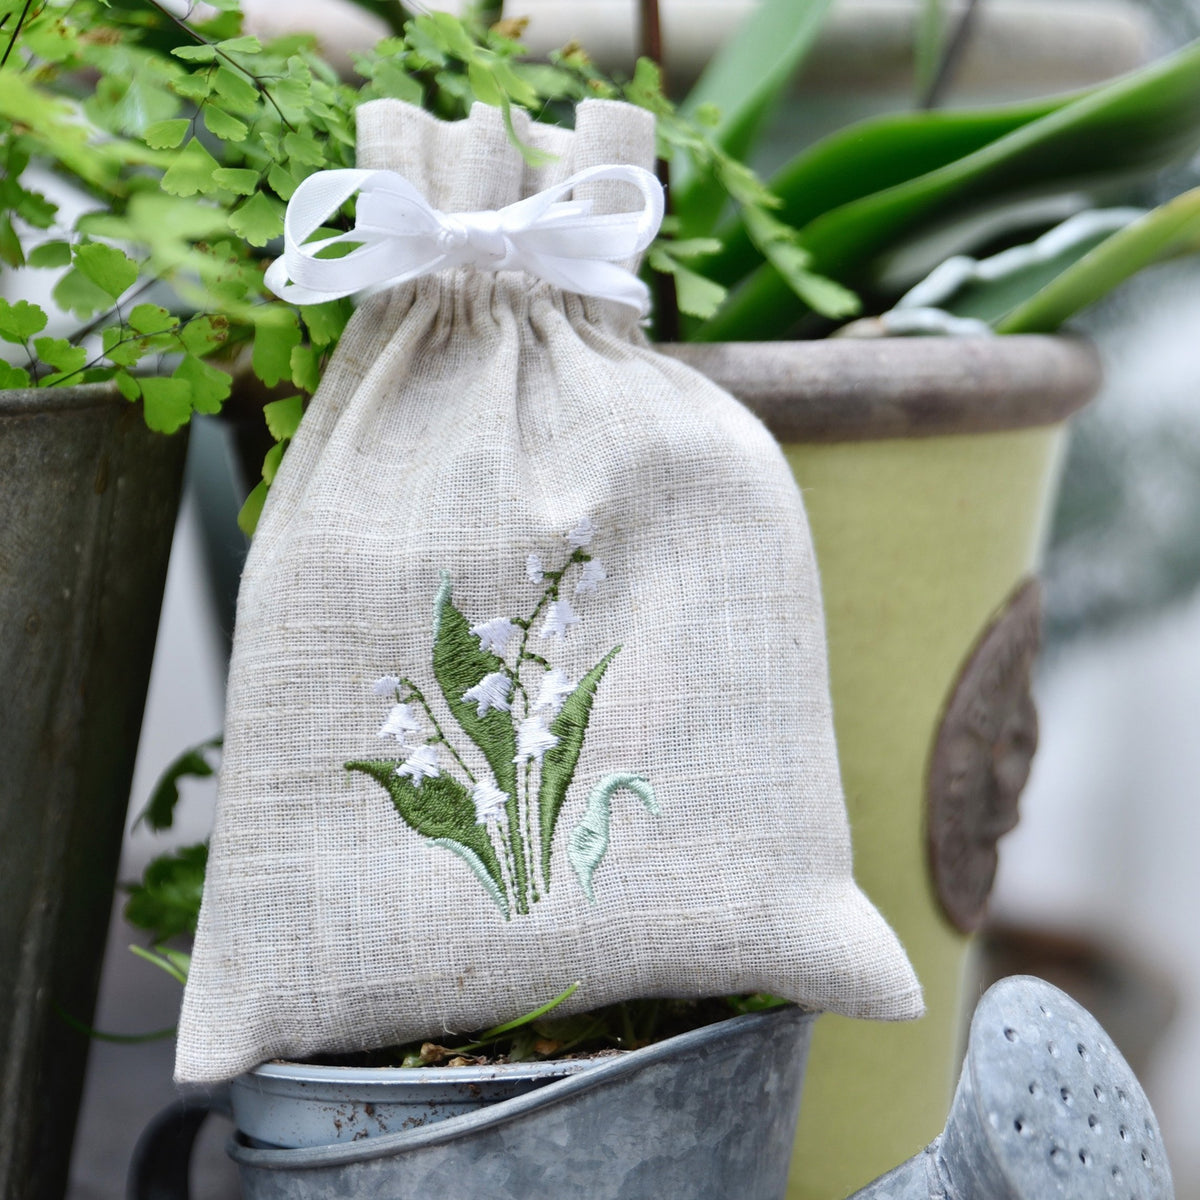 Pack of 3 Lily of the Valley Linen Lavender Sachet